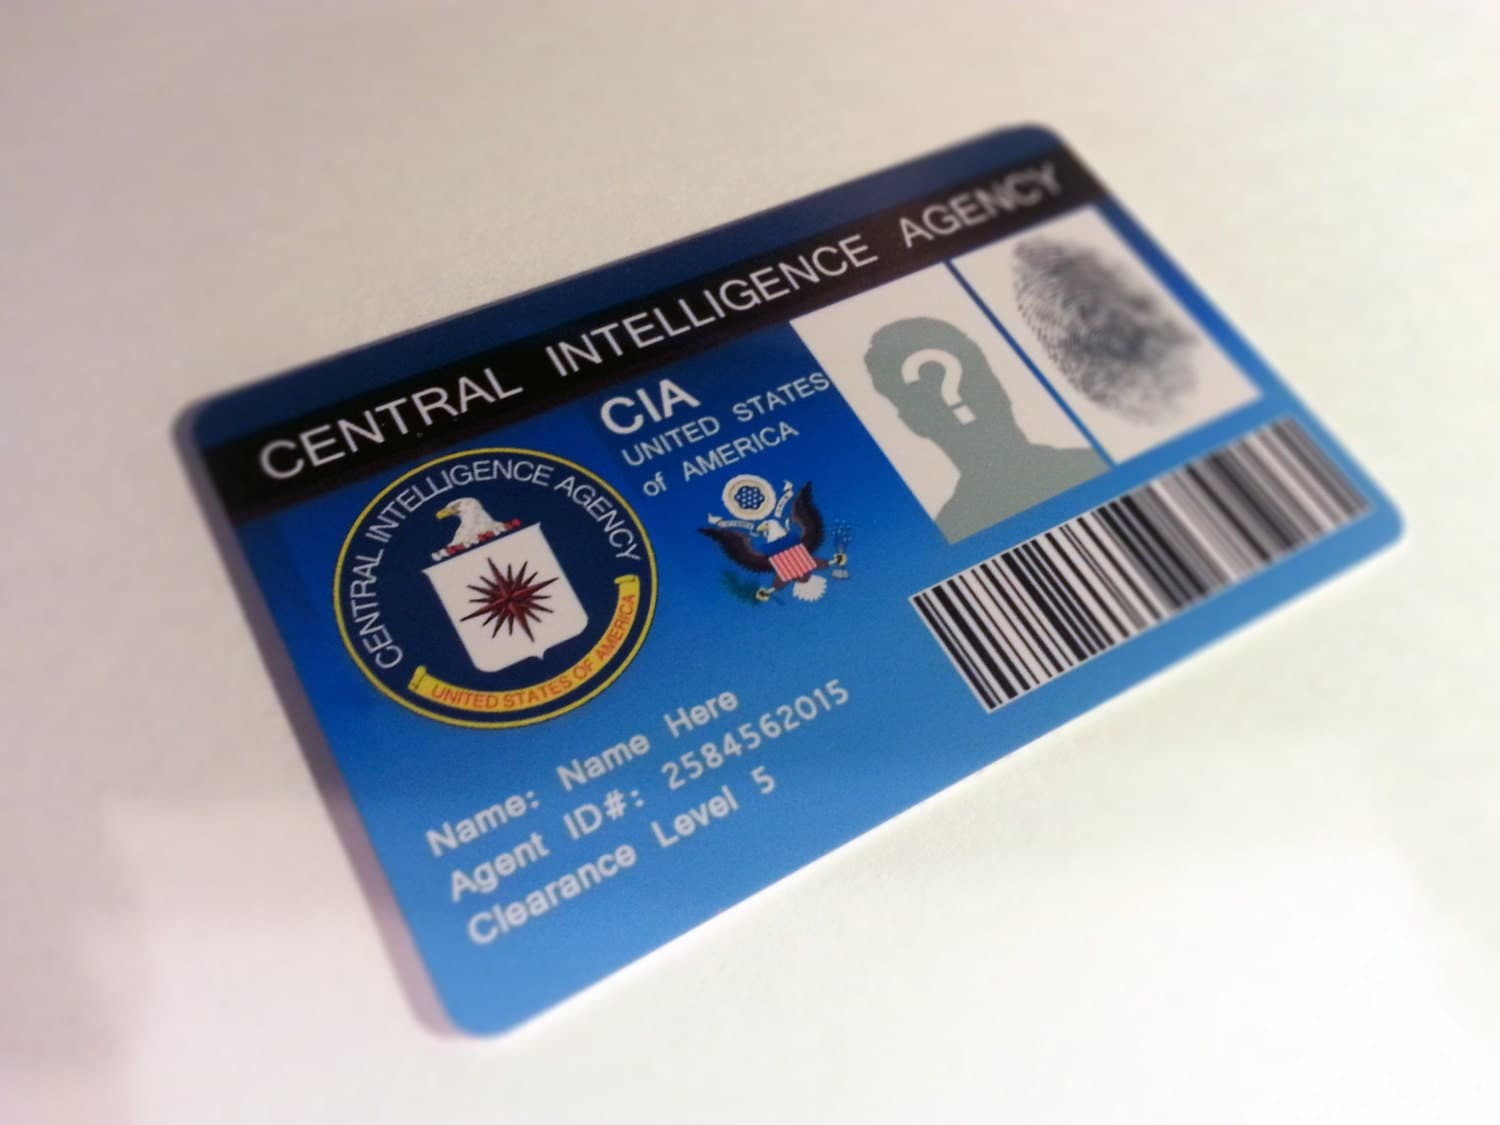 custom-cia-holographic-id-badge-by-malinkocrafts-on-etsy